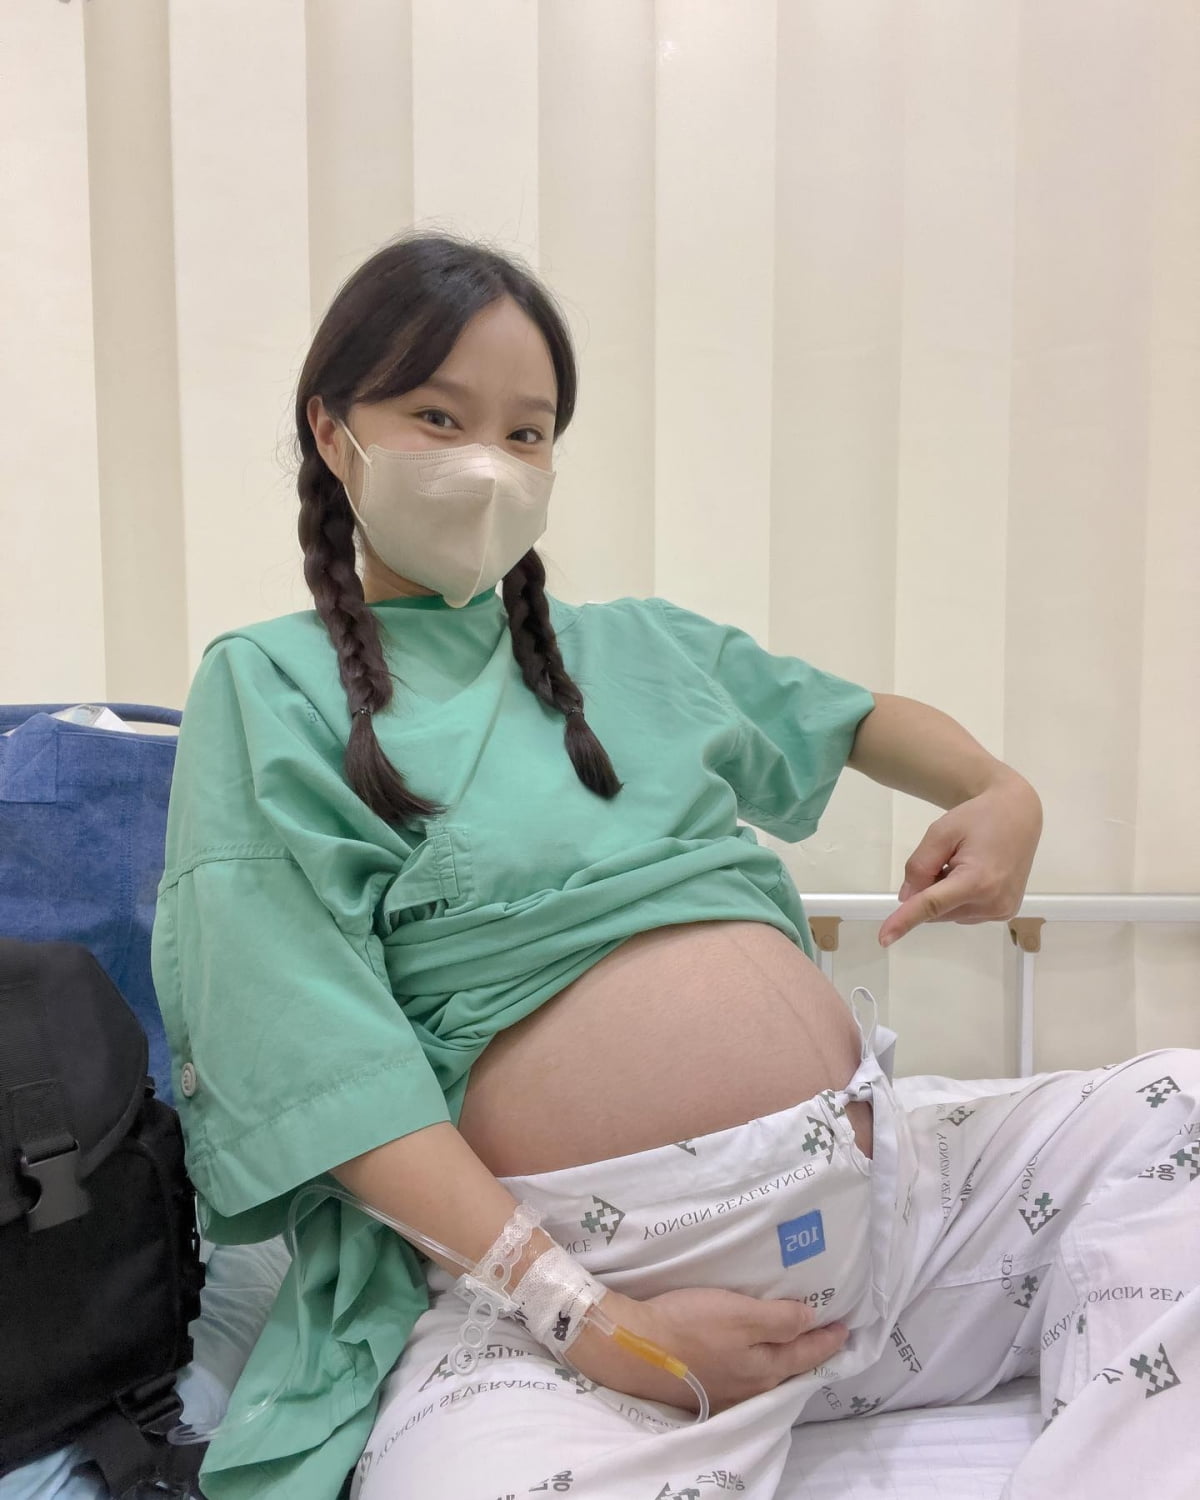 Heijini, daughter born by caesarean section "I'm too healthy"